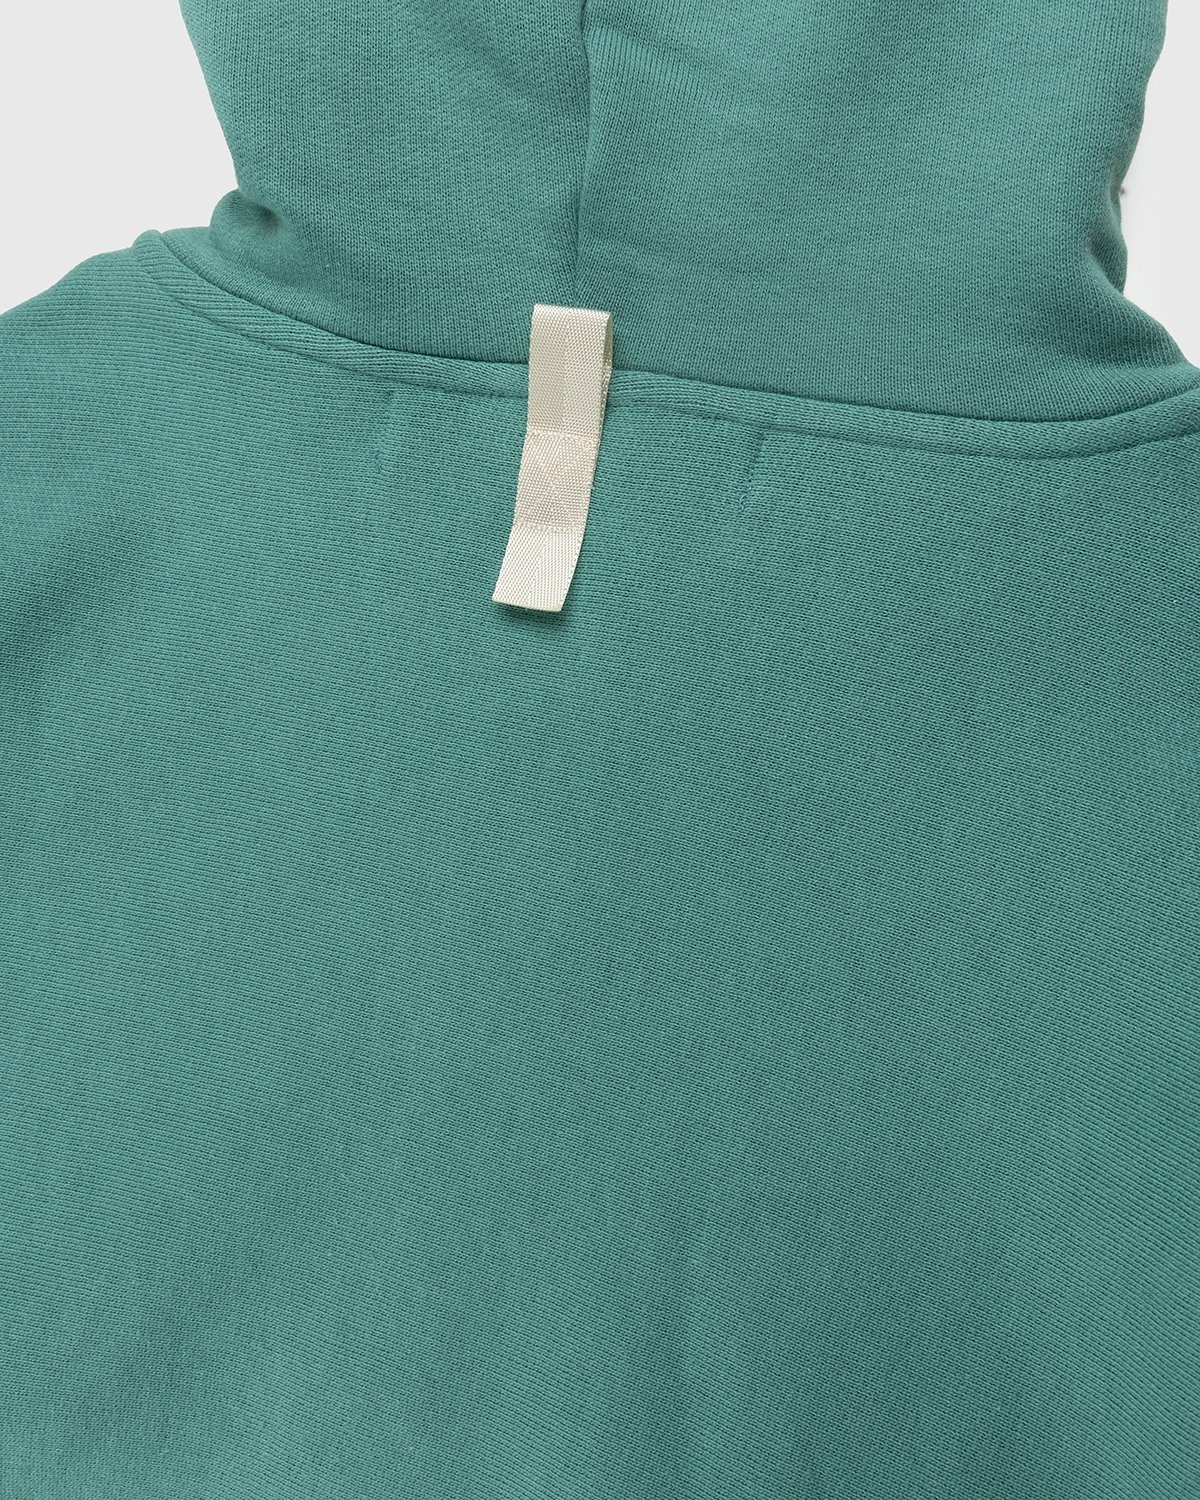 Abc. – Zip-Up French Terry Hoodie Apatite - Sweats - Green - Image 5